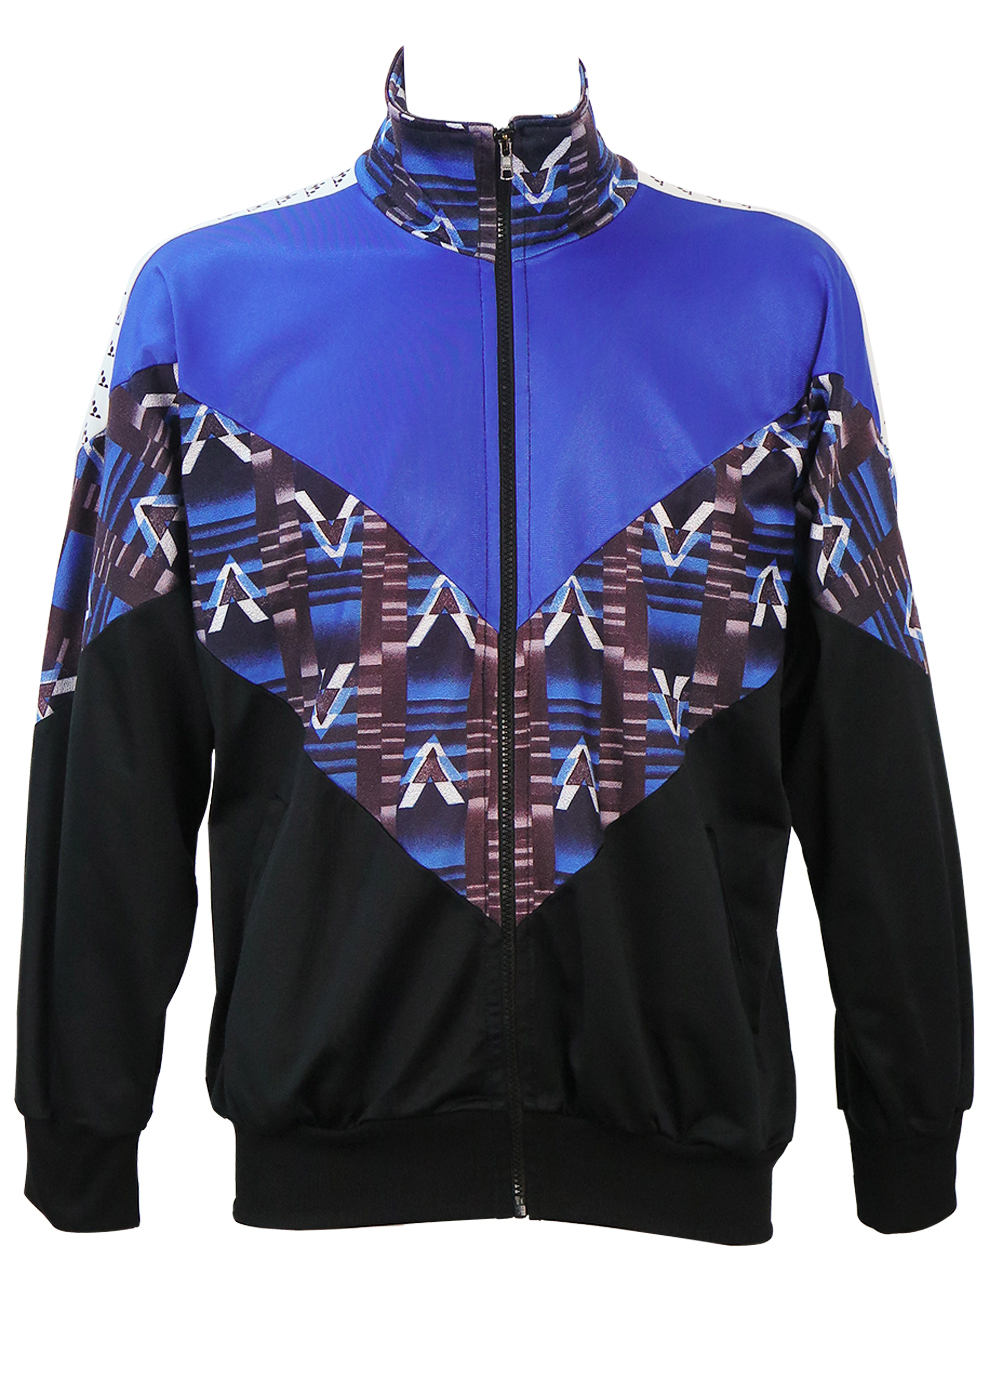 Chevron Striped Track Jacket with Aztec Print in Blue, Brown & Black ...